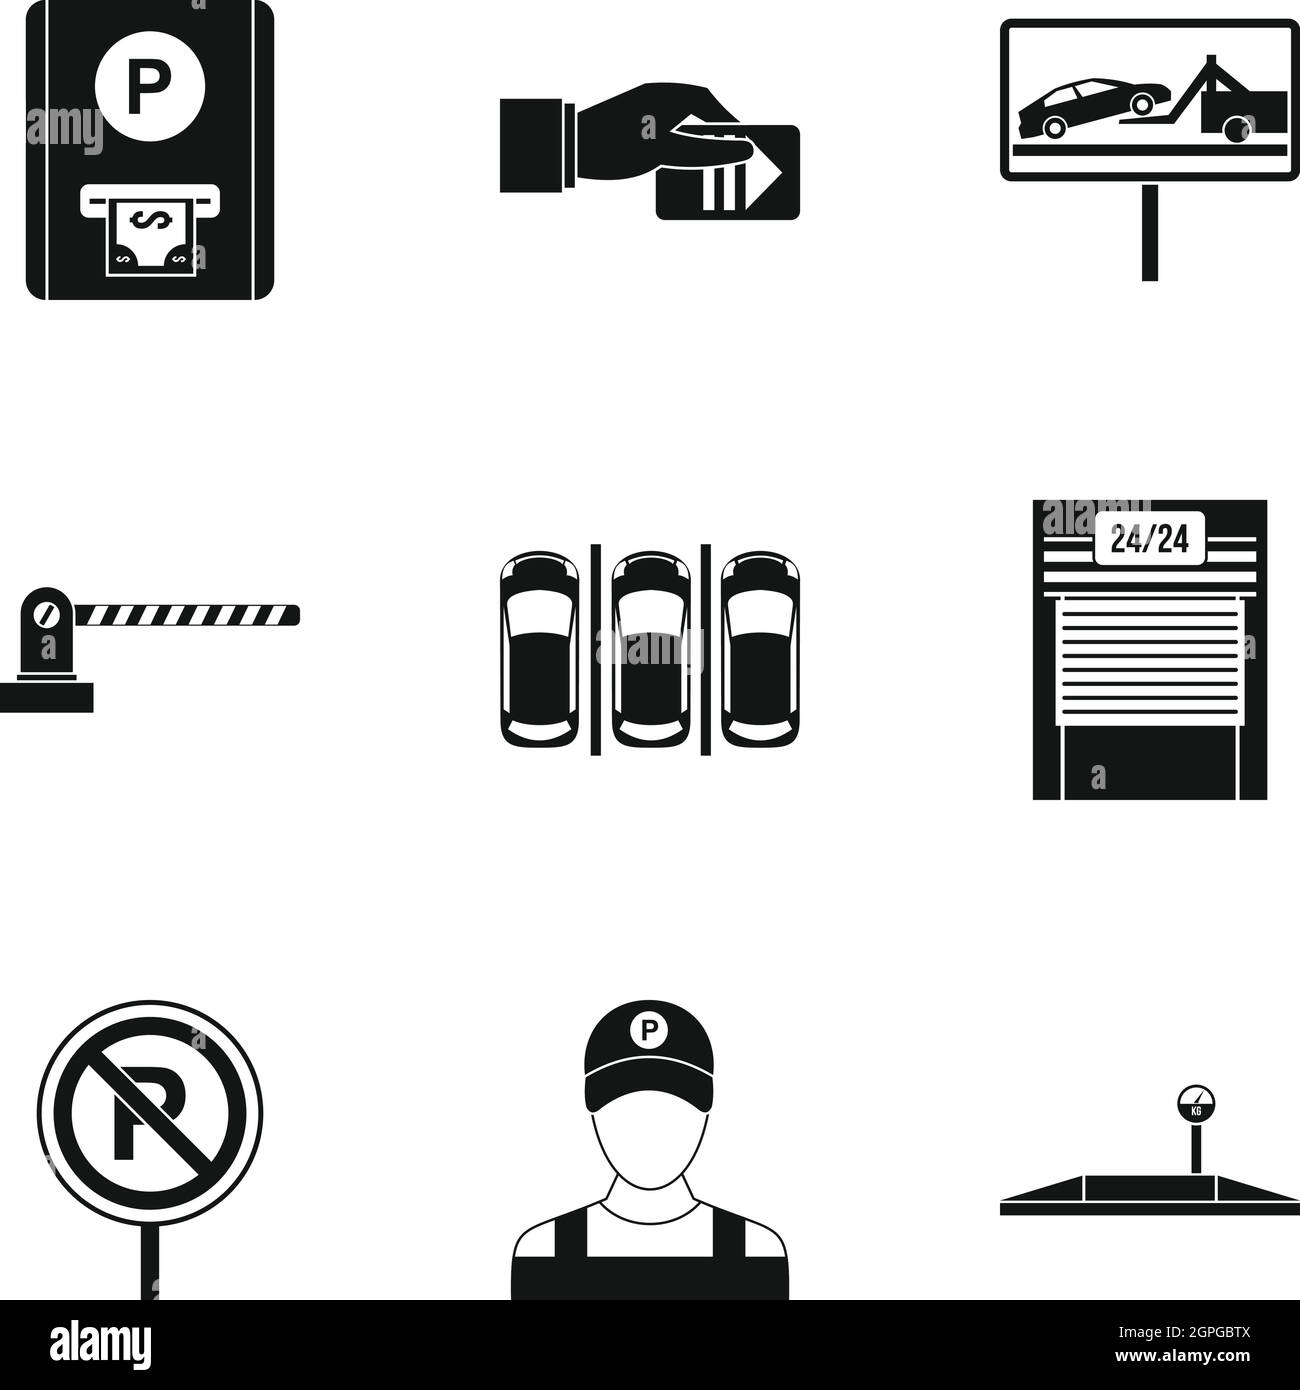 Valet parking icons set, simple style Stock Vector